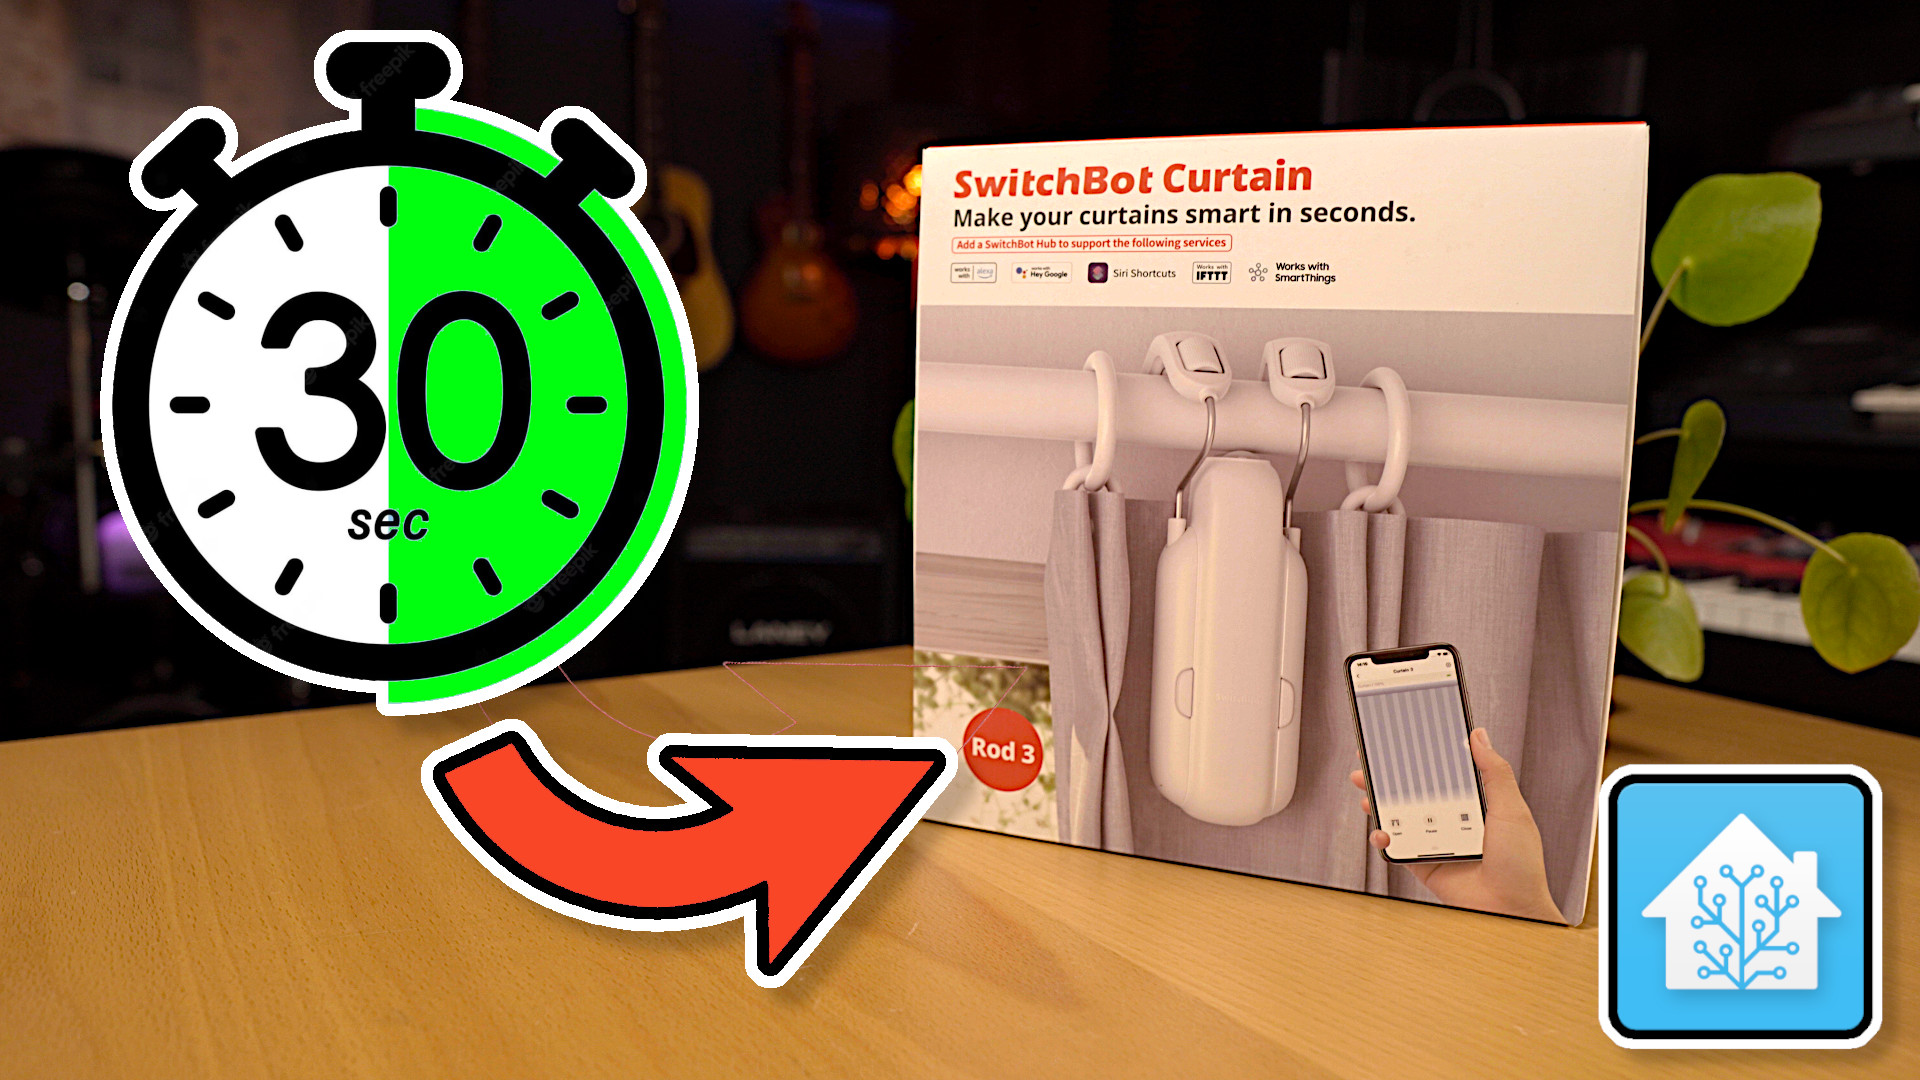 The Switchbot Curtain 3 is so easy to install!